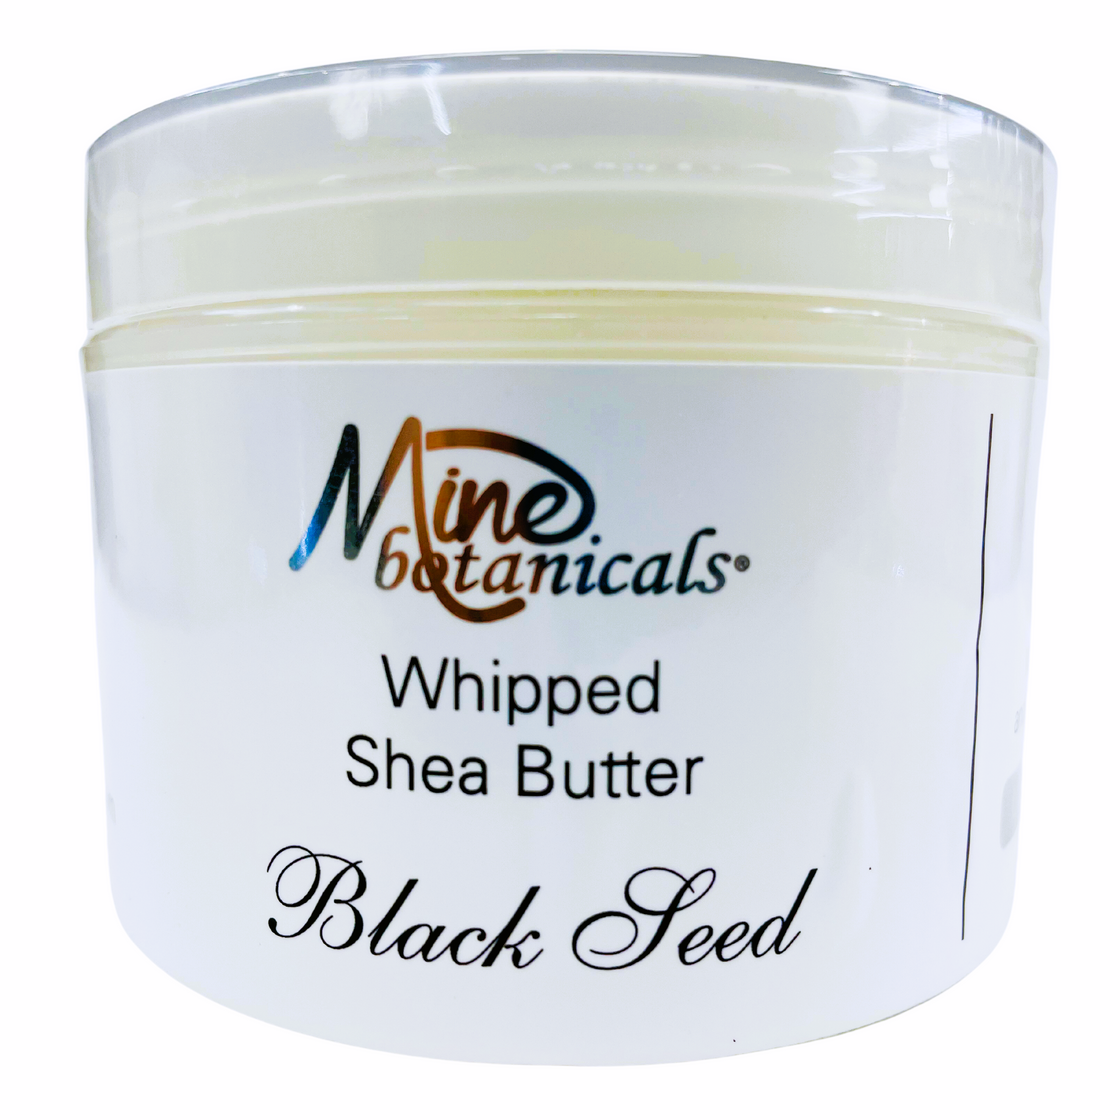 Ultra Premium Whipped Shea Butter Black Seed